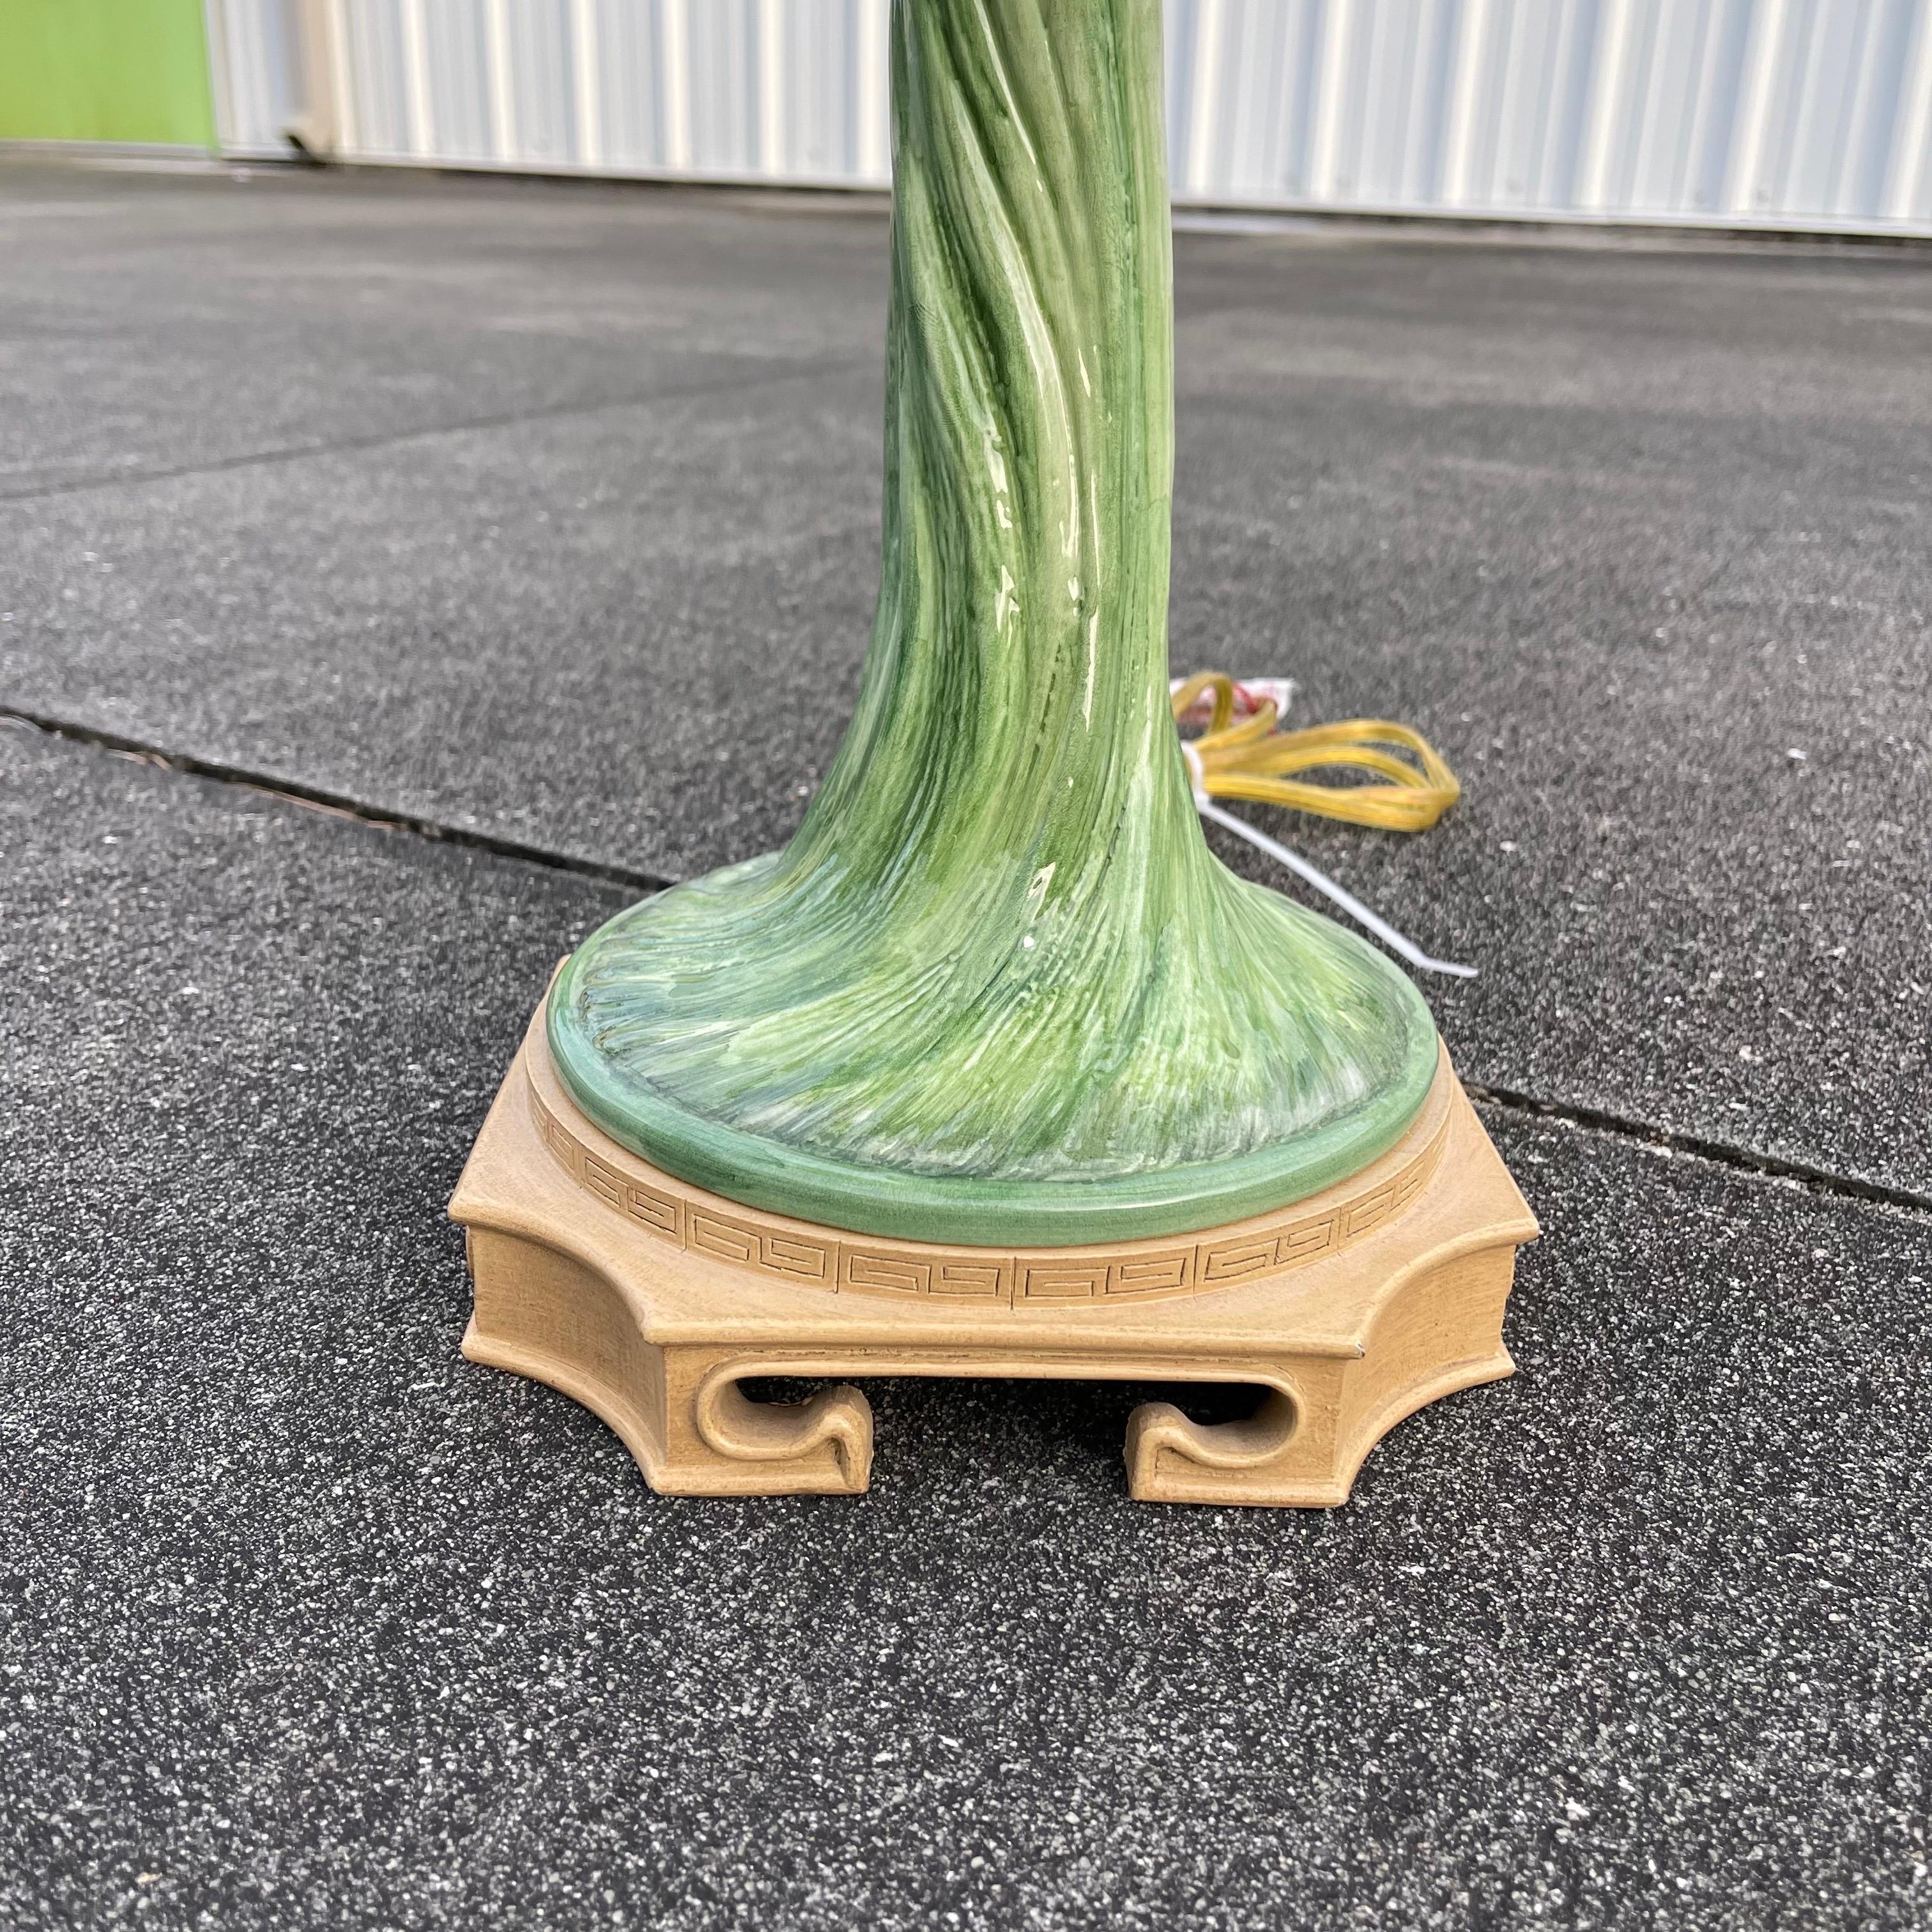 Glazed Ceramic Palm Tree Form Table Lamp In Good Condition For Sale In Jensen Beach, FL